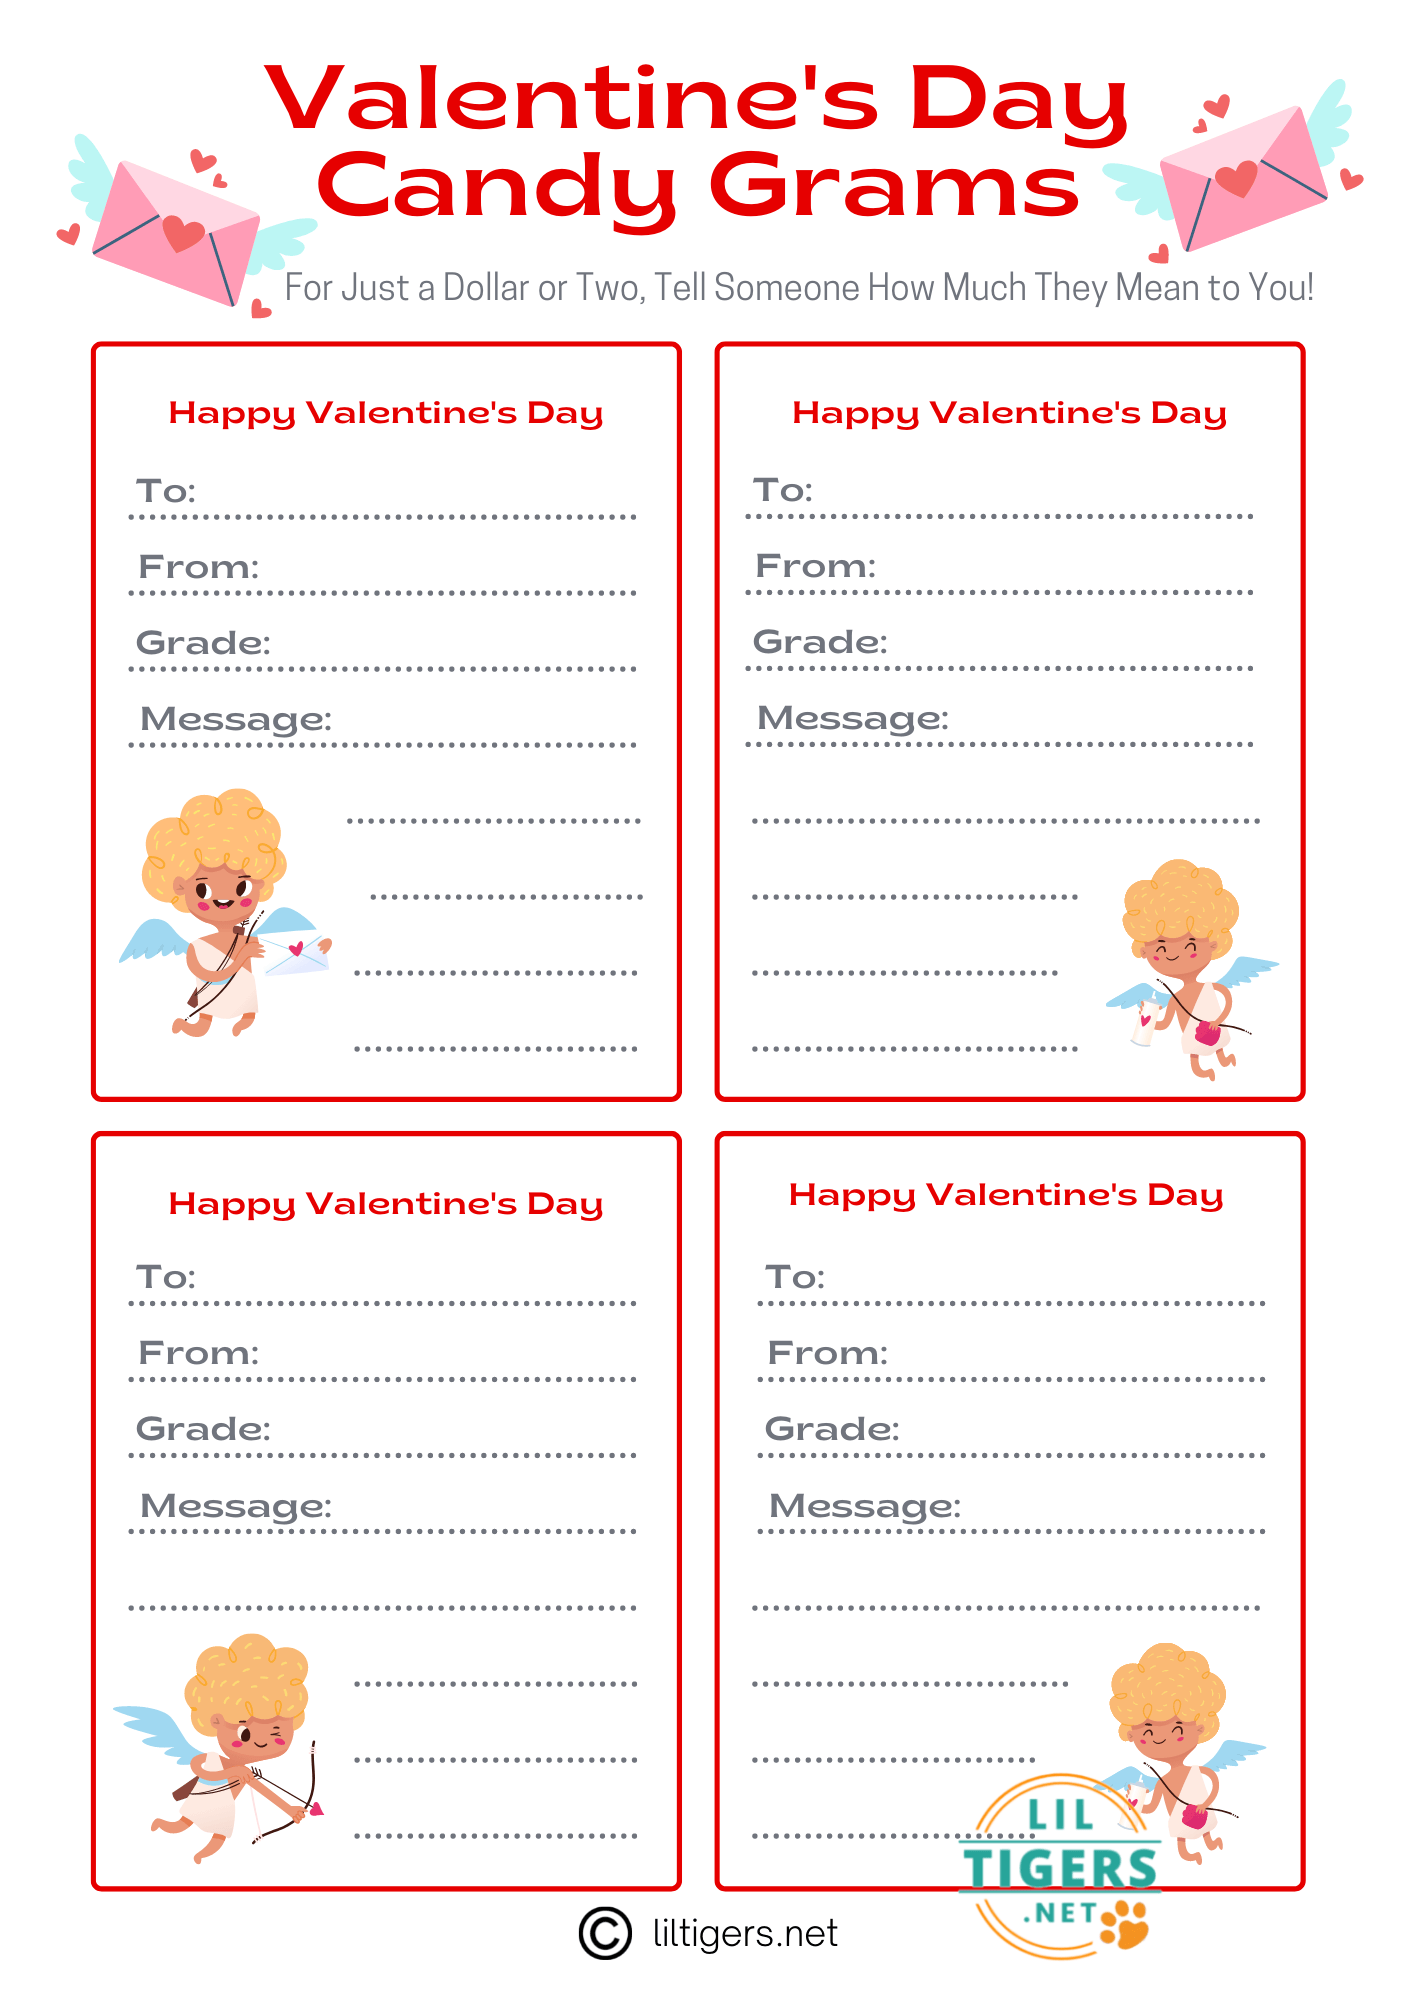 Free Valentine's Day Candy Gram Printables Lil Tigers Lil Tigers